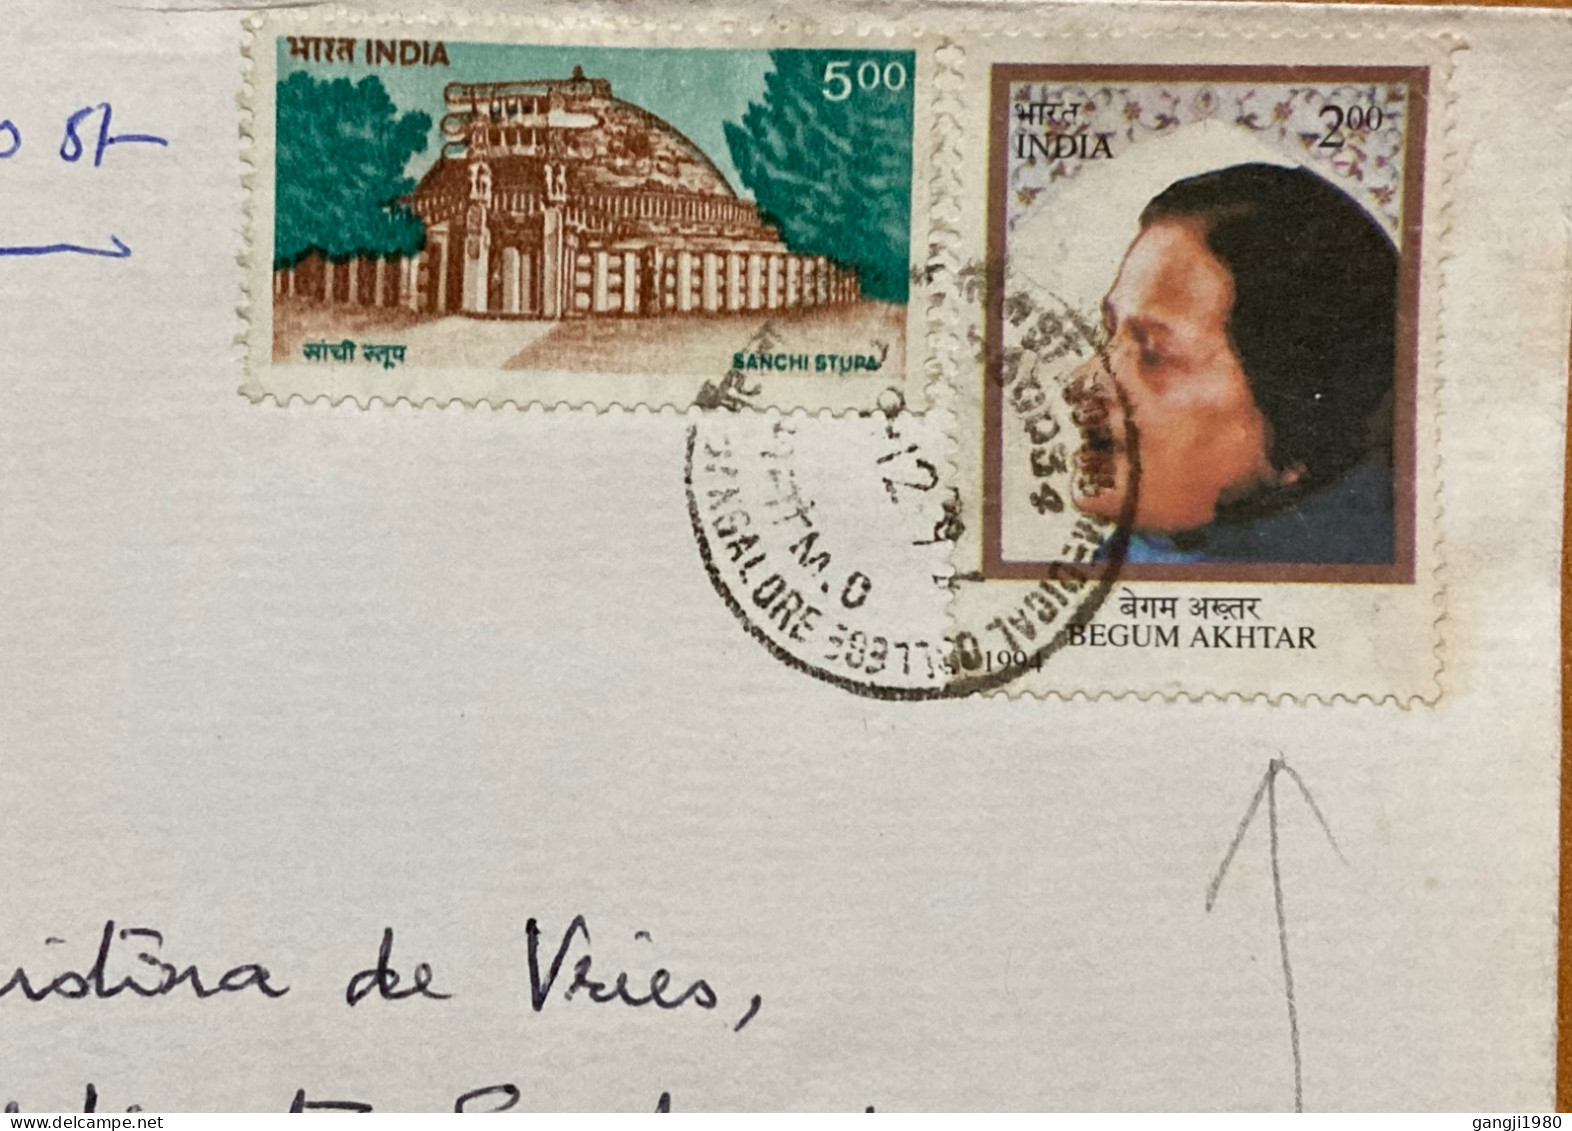 INDIA 1994, COVER USED TO NETHERLANDS, WITHDRAWN STAMP BEGUM AKHTAR, & SANCHI STUPA, RARE USE ON COVER, BANGALORE CITY C - Covers & Documents